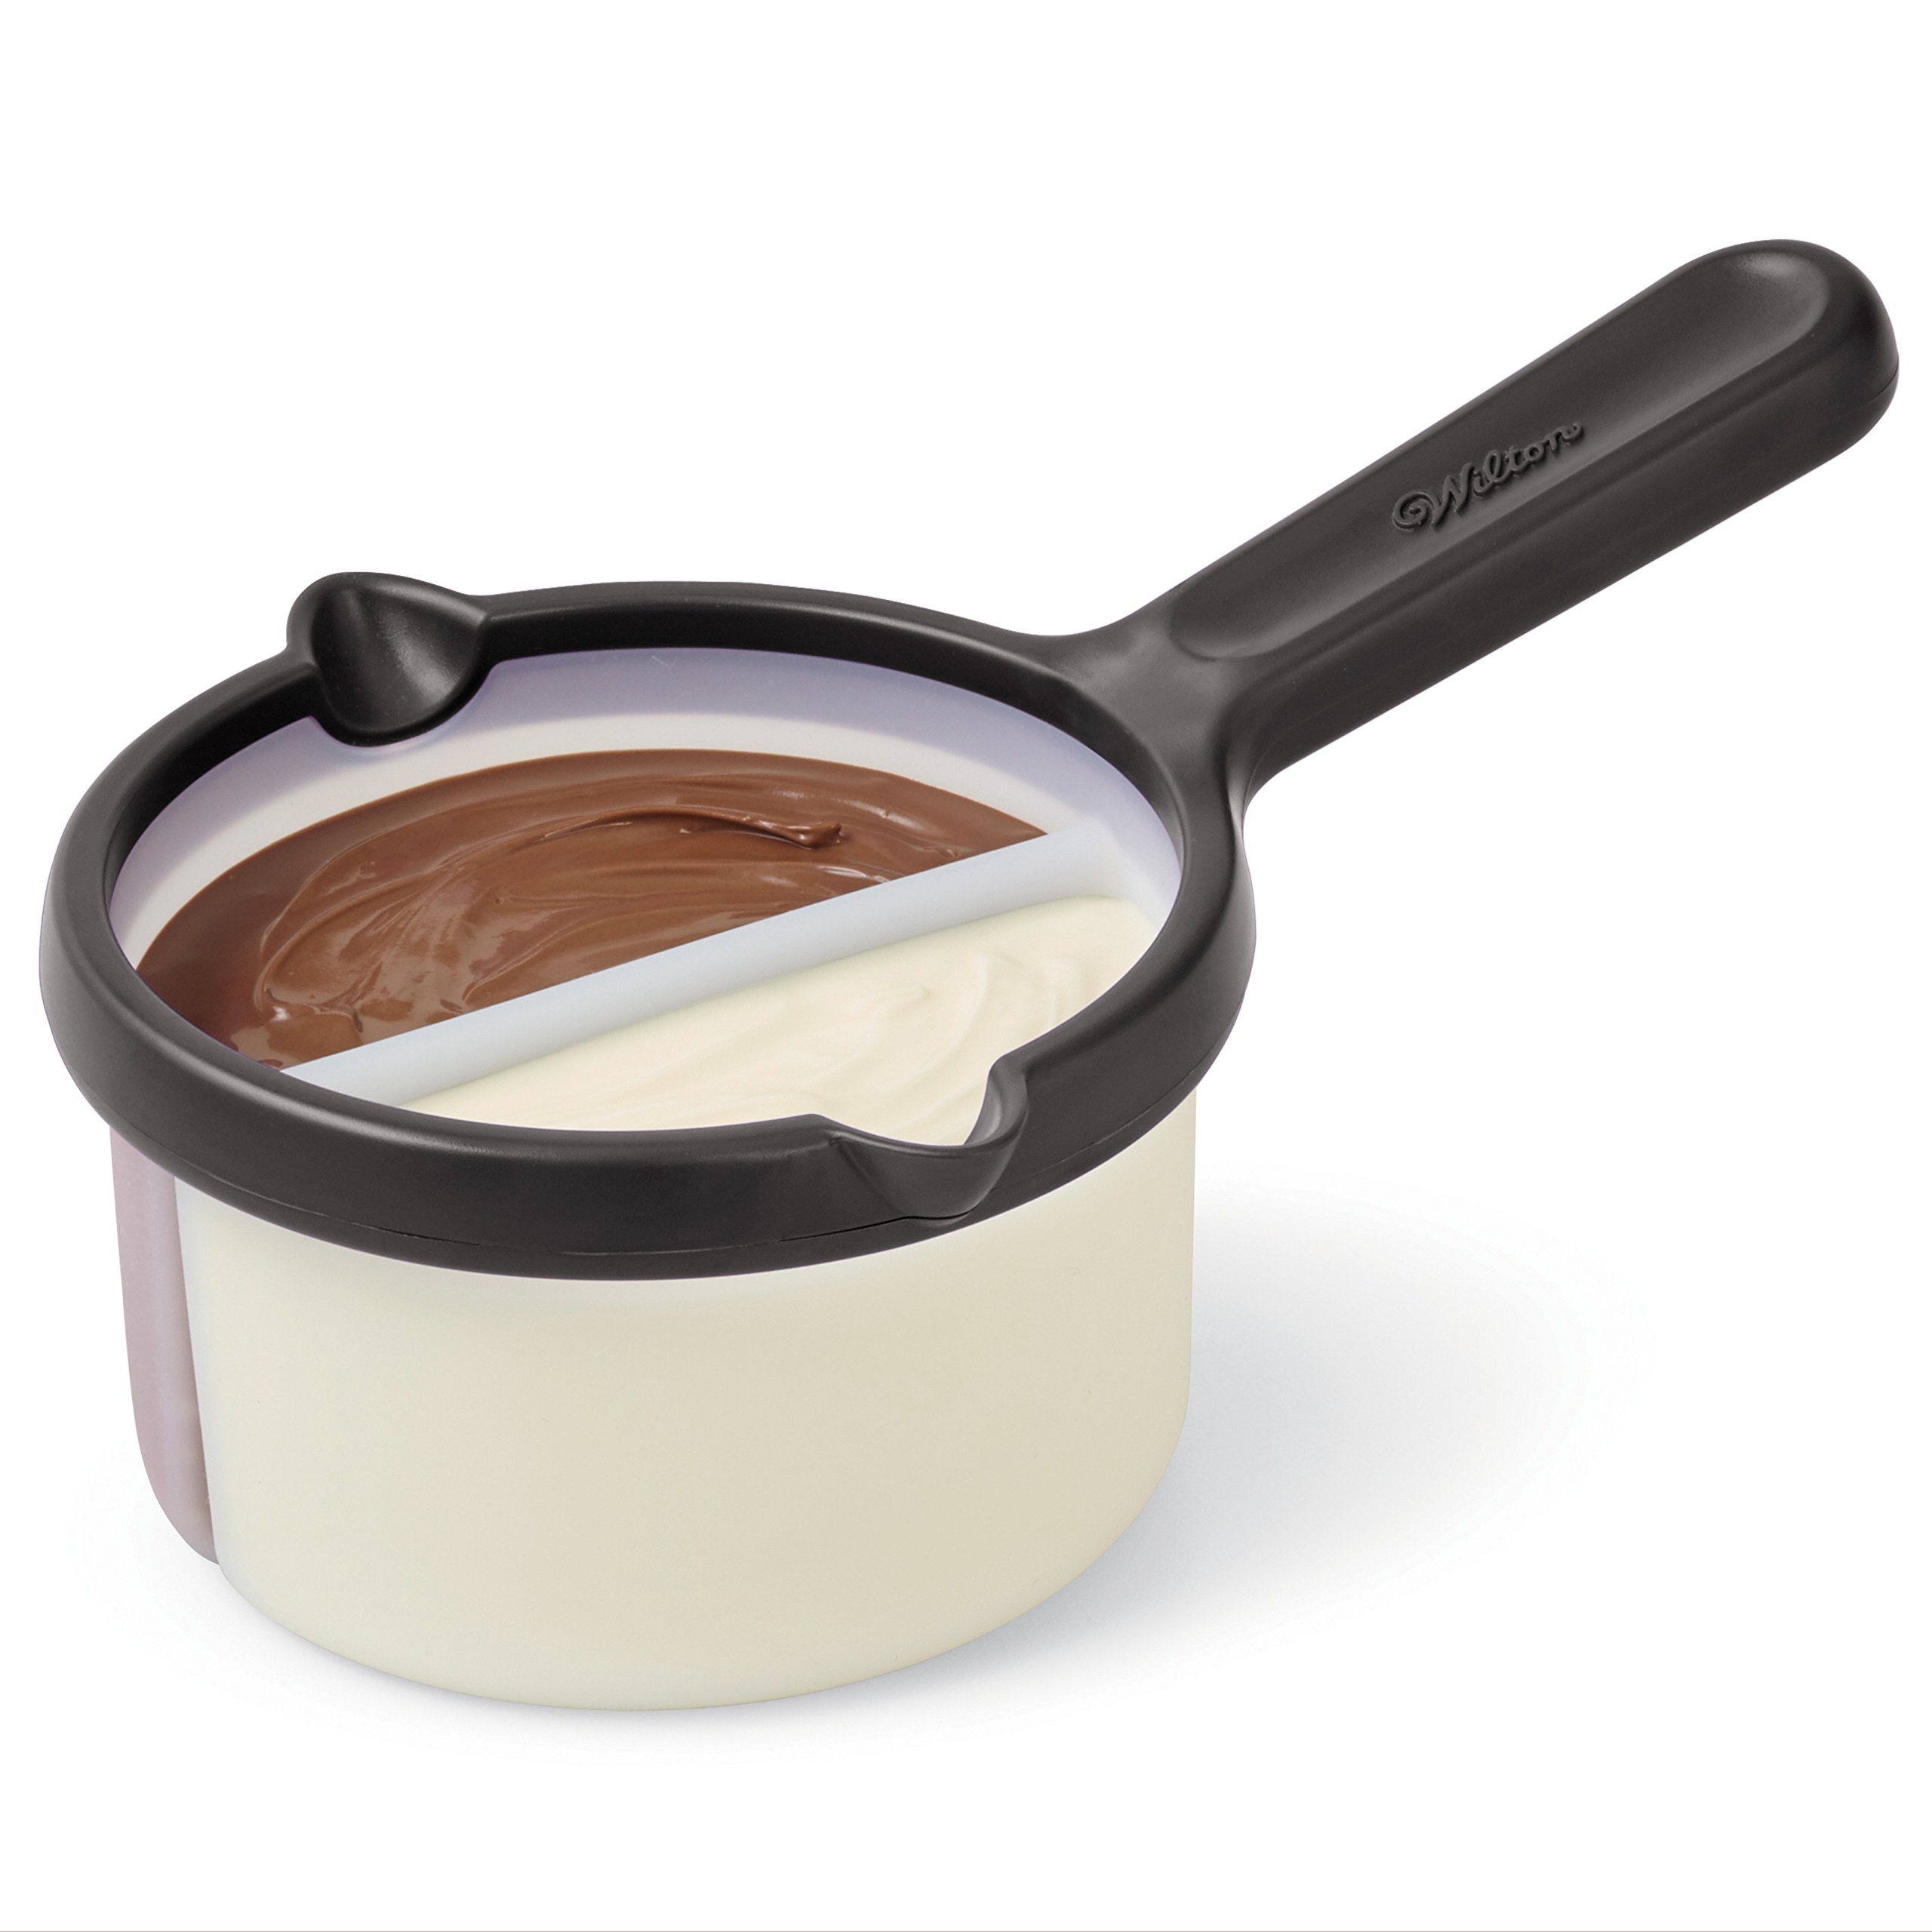 Wilton Candy Silicone Dual Melting Pot Insert